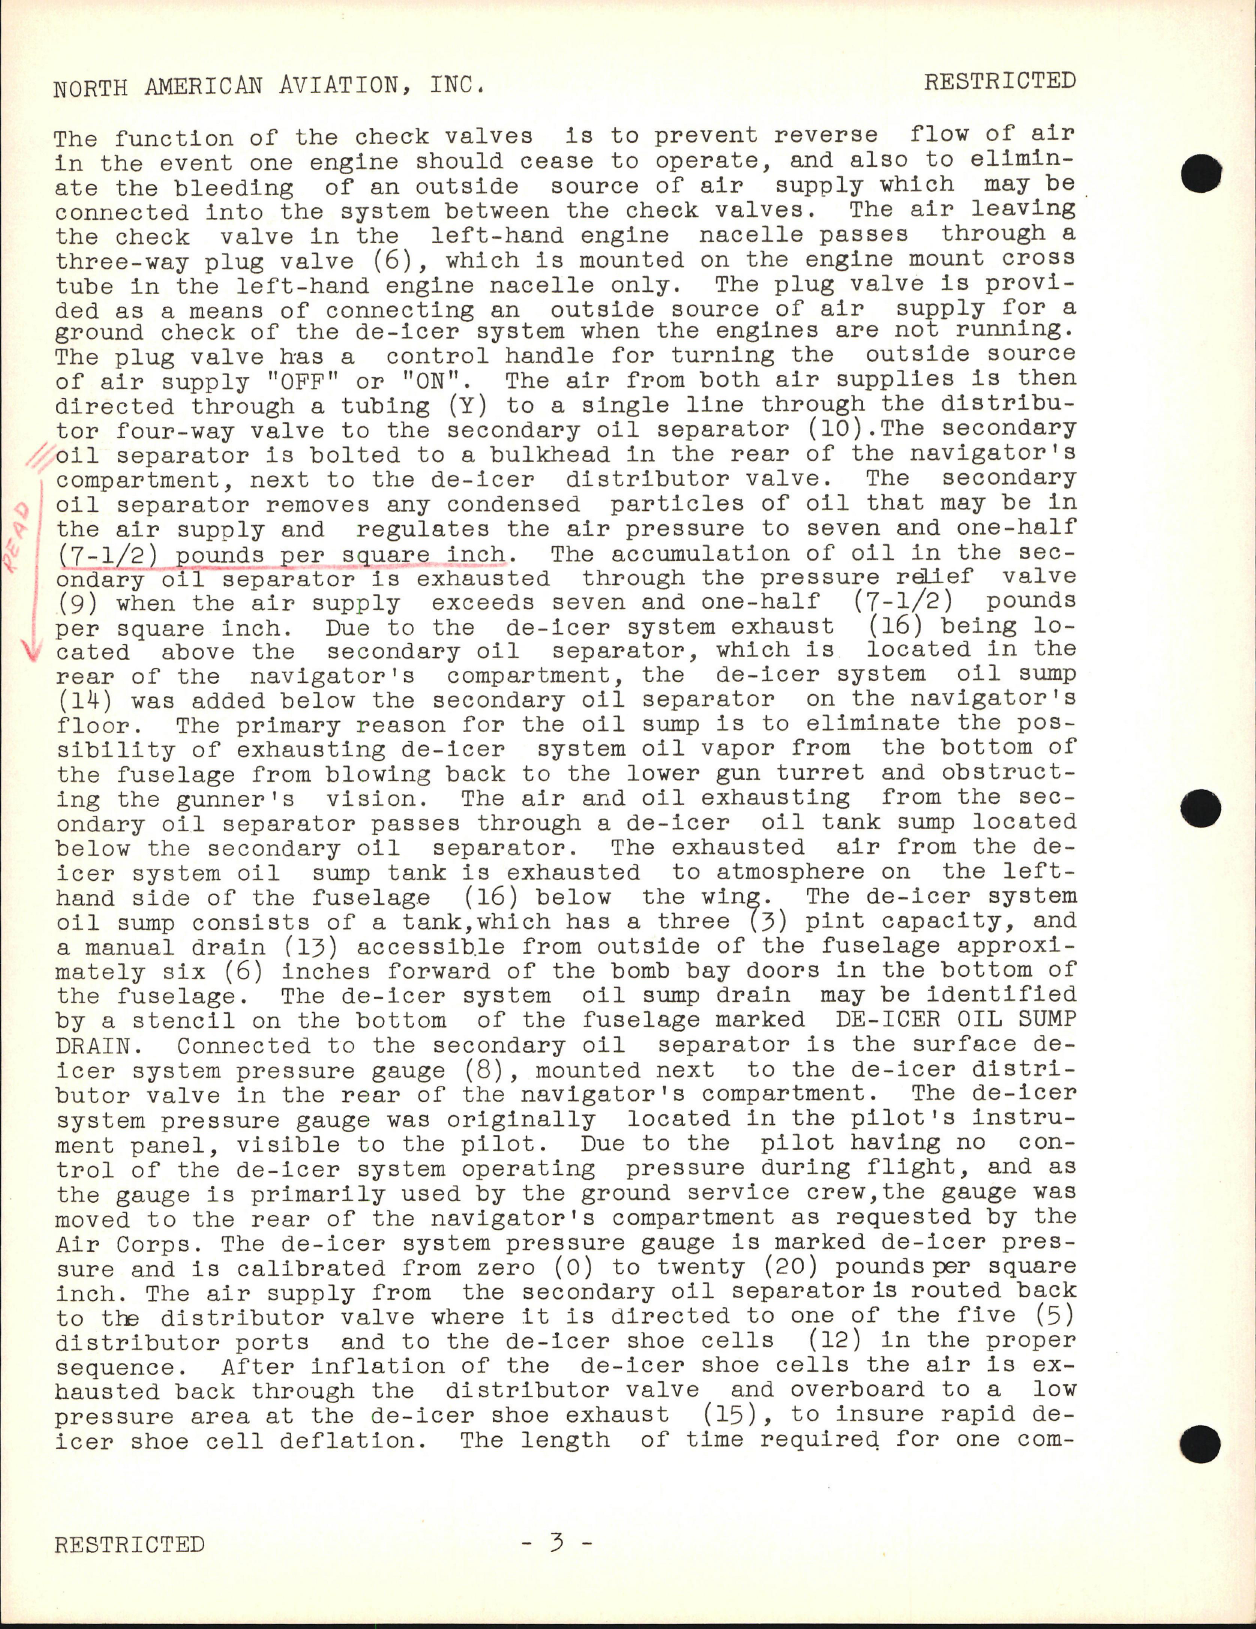 Sample page 6 from AirCorps Library document: Service School Lectures - De-Icer System